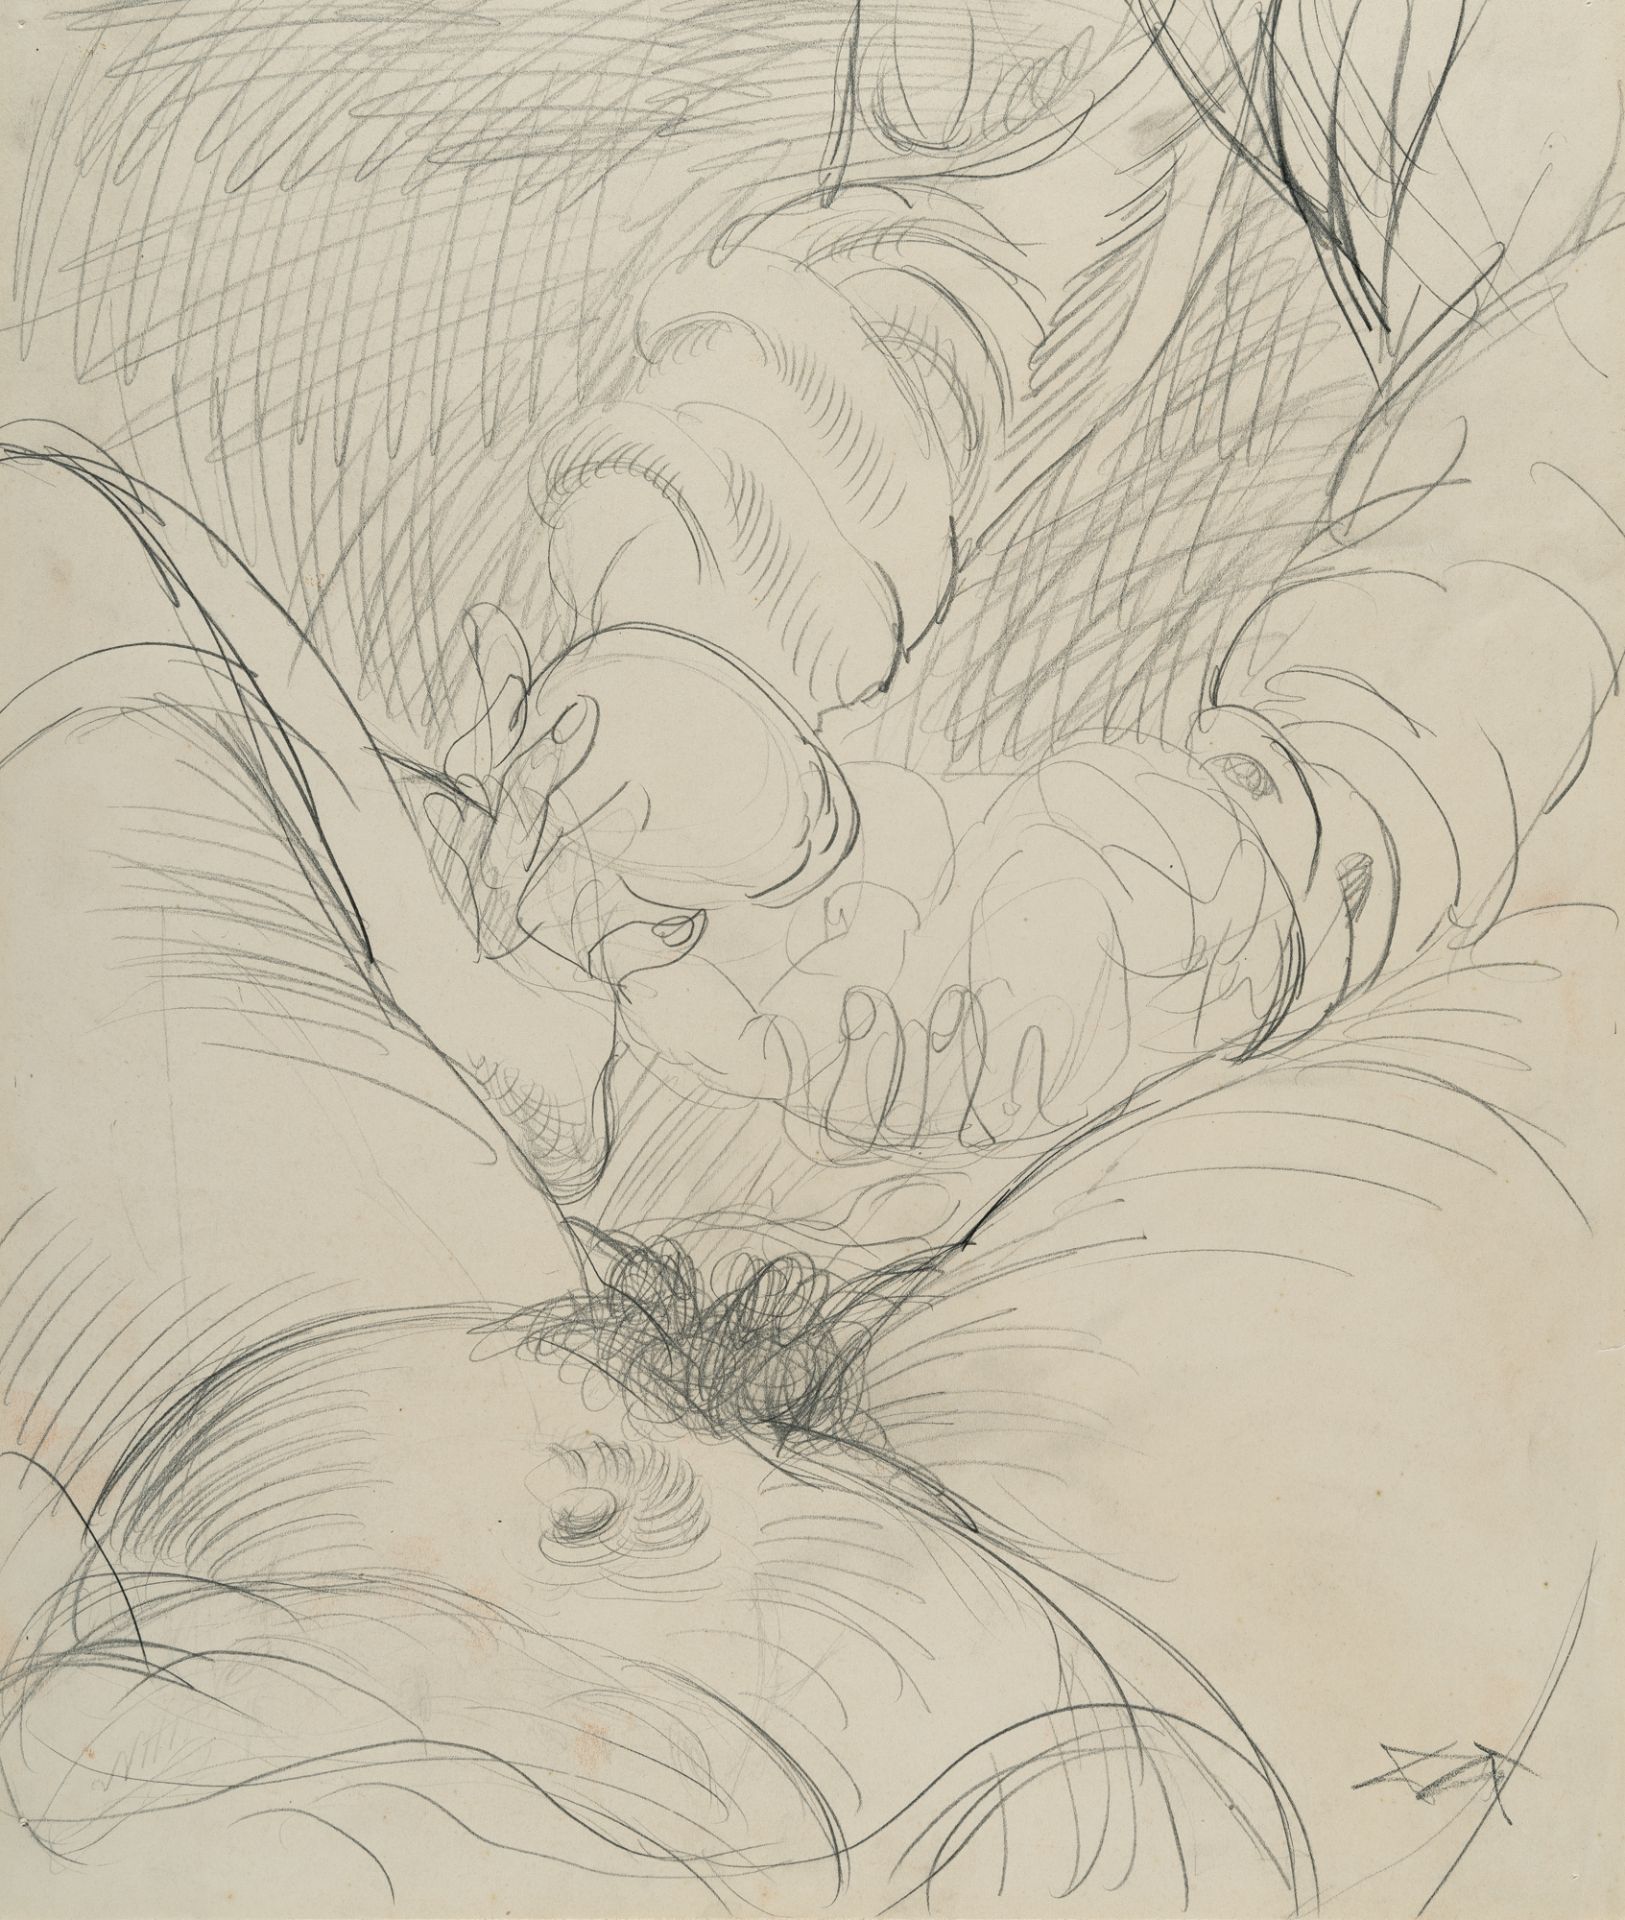 Otto Dix, Birth I – Study for the painting "Birth".Pencil on wove. (1927). Ca. 45 x 38 cm. Signed